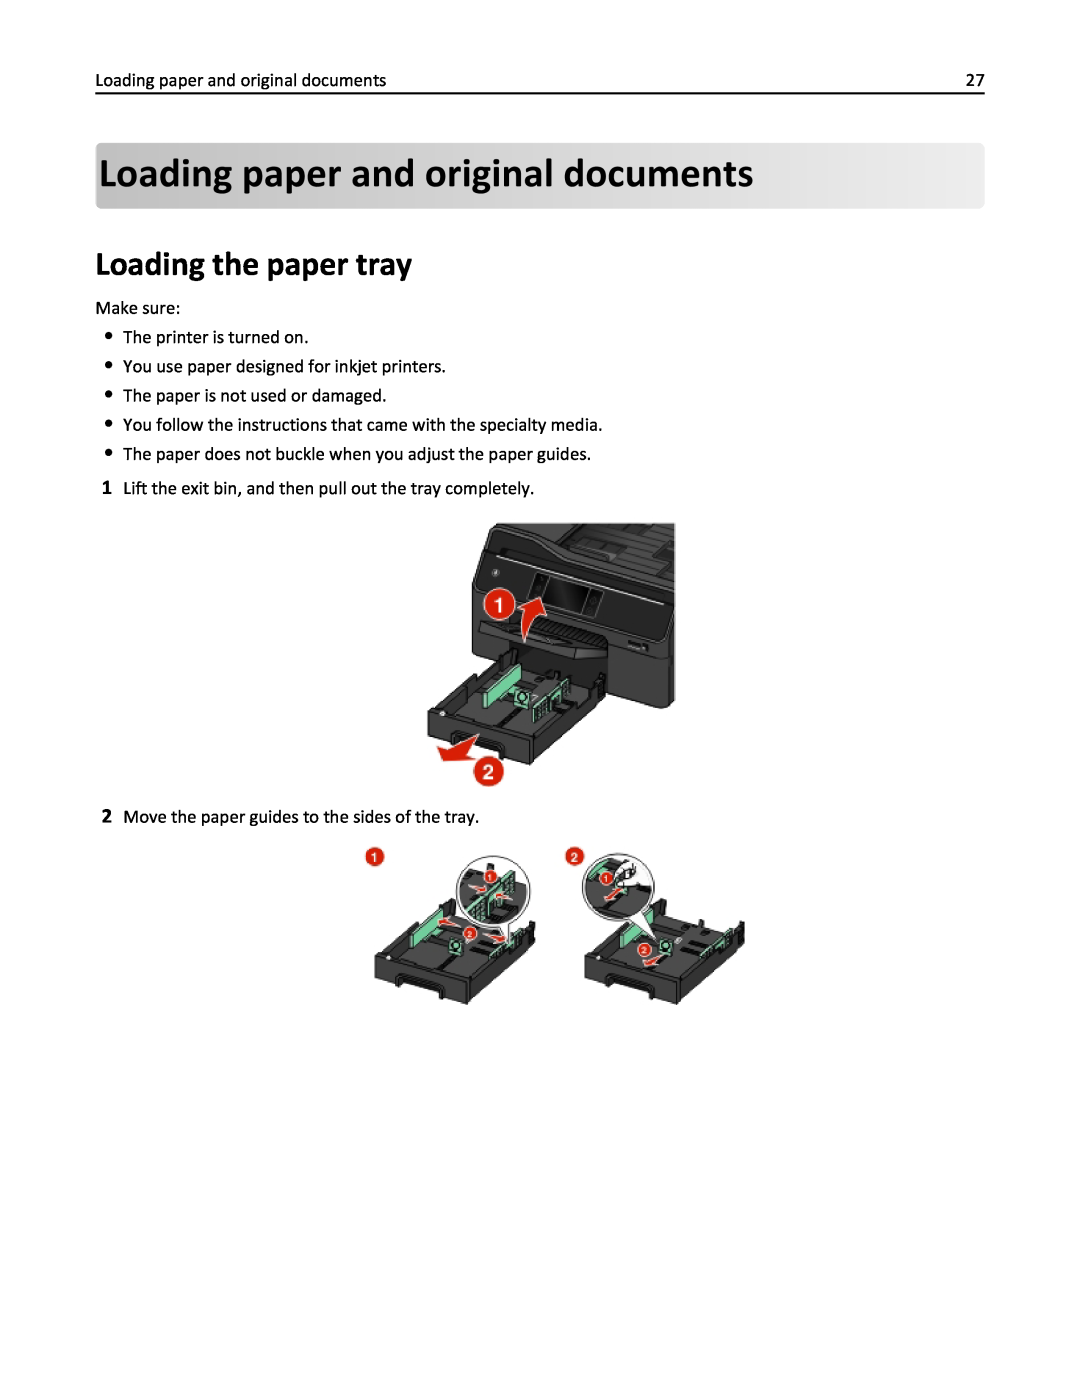 Lexmark 200, 20E manual Loading paper and original documents, Loading the paper tray 